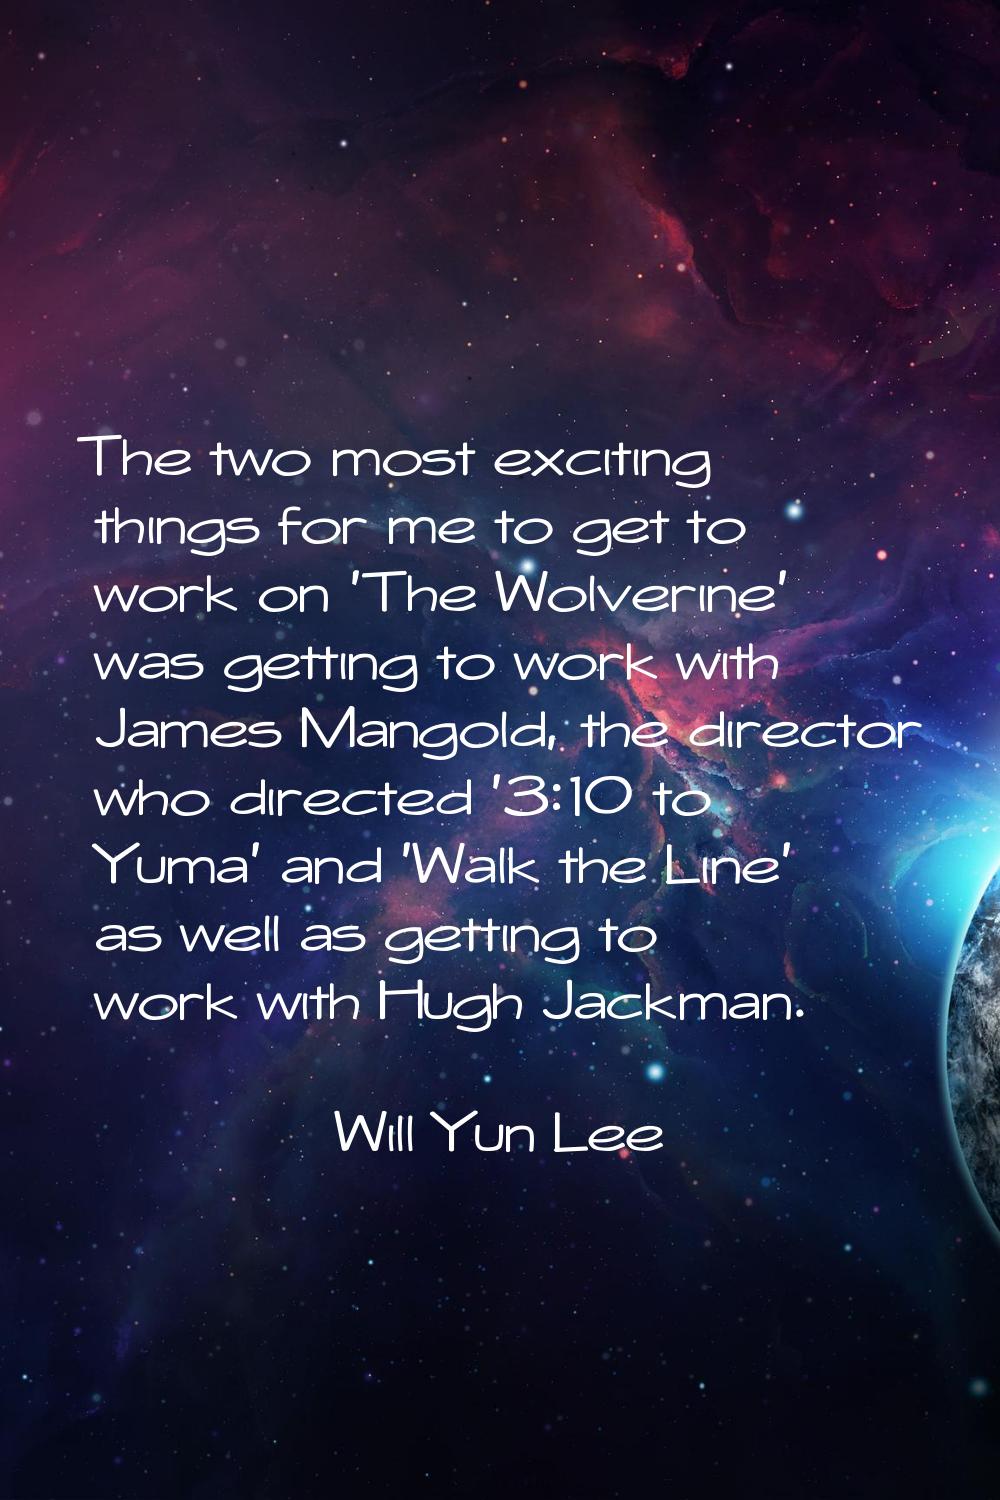 The two most exciting things for me to get to work on 'The Wolverine' was getting to work with Jame